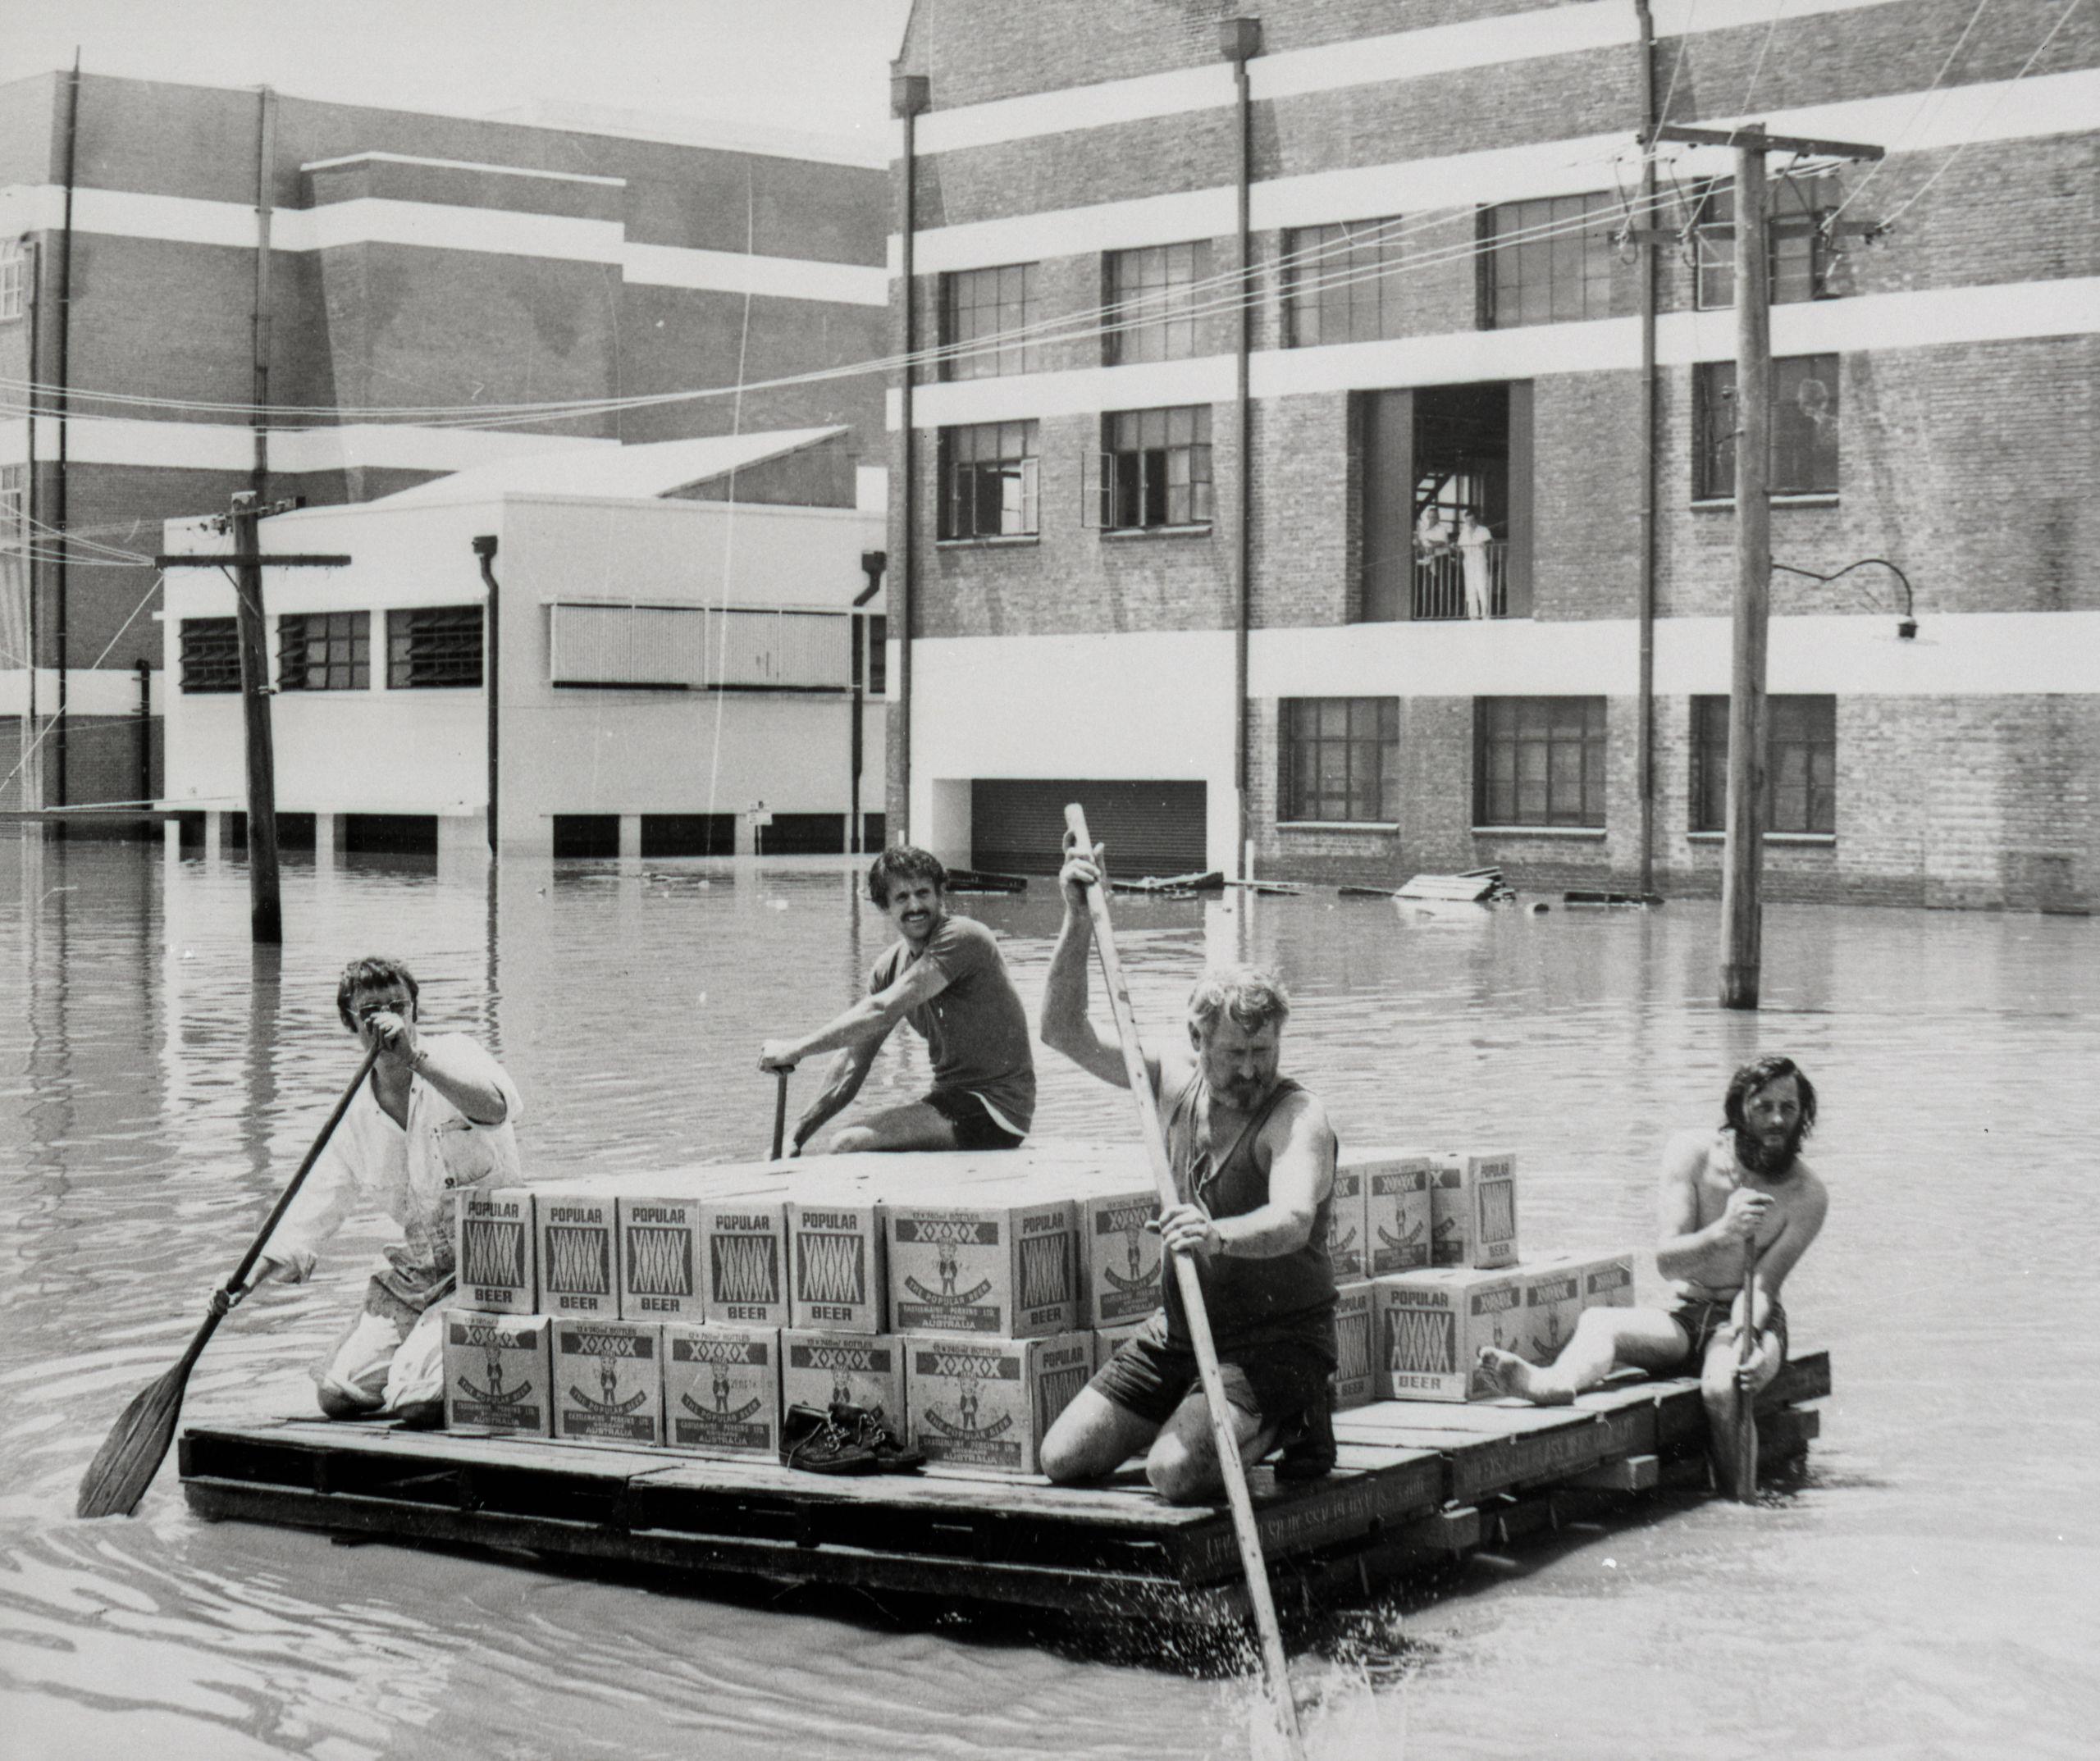 Brisbane flood January 24 1974 with some people rescuing beer from a brewery.jpeg